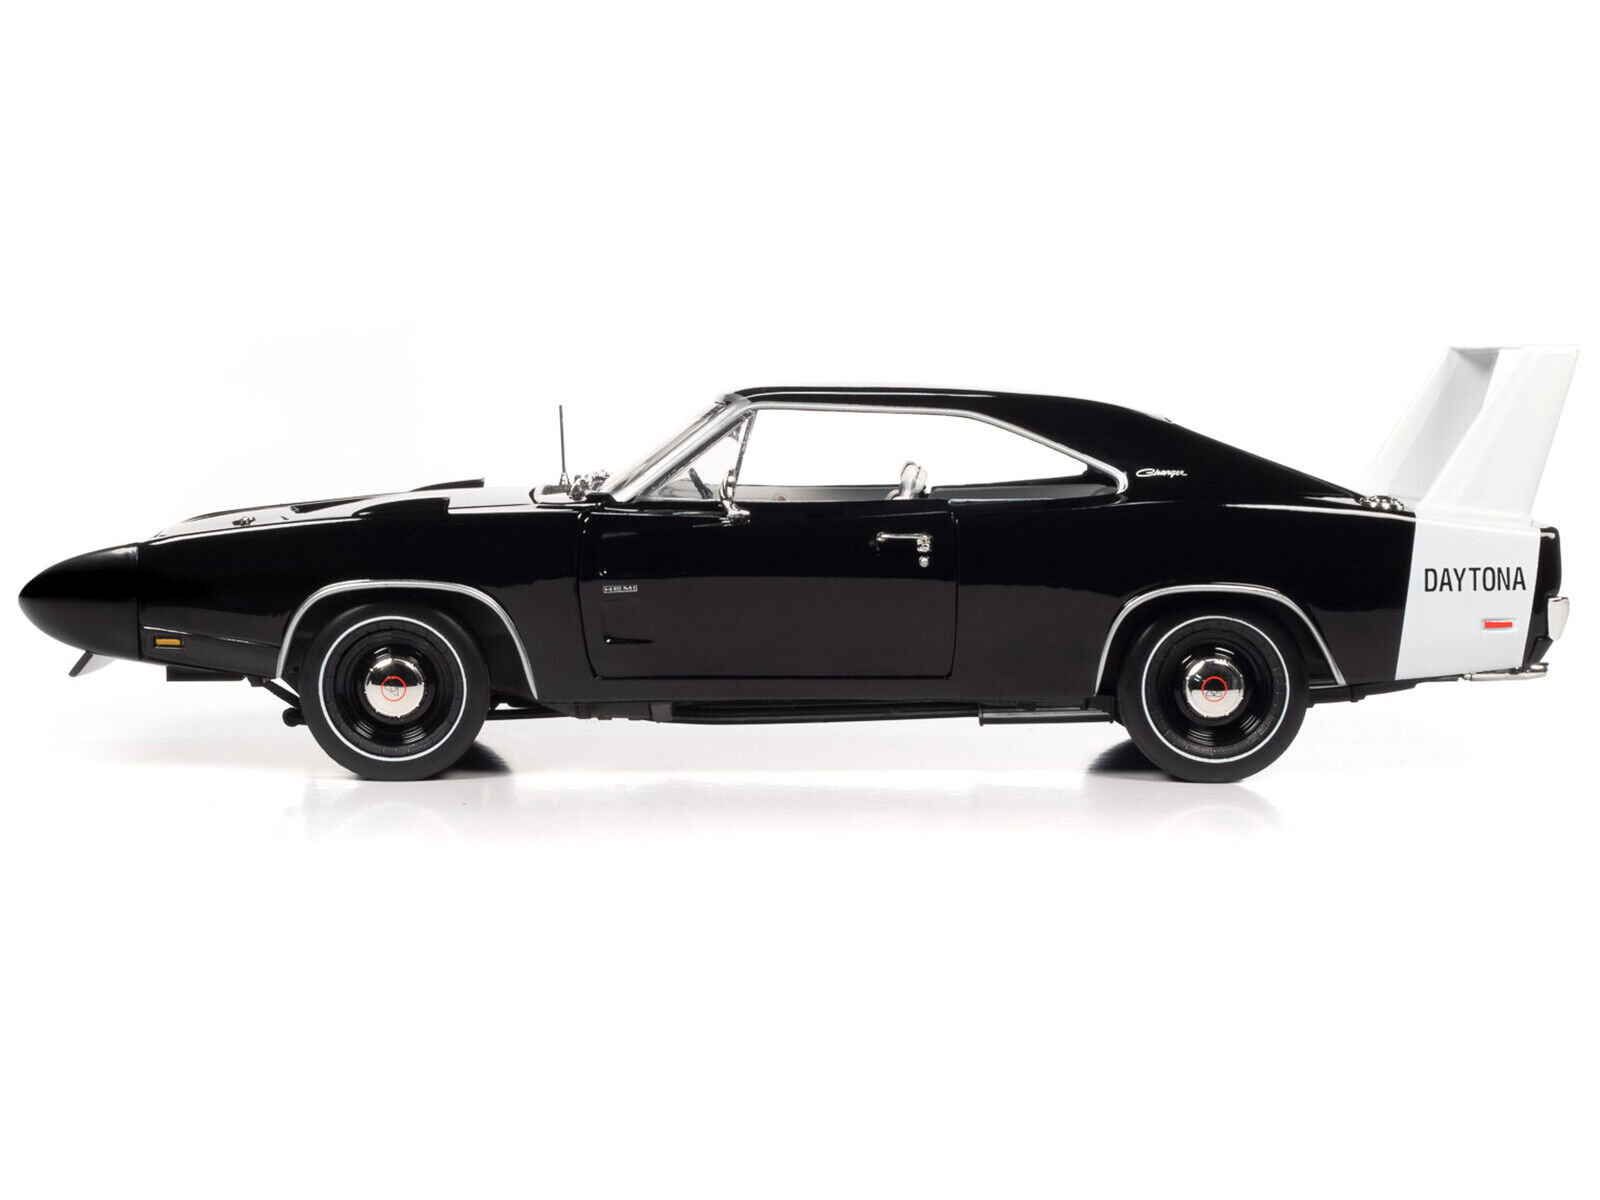 1969 Dodge Charger Daytona X9 Black with White Interior and Tail Stripe